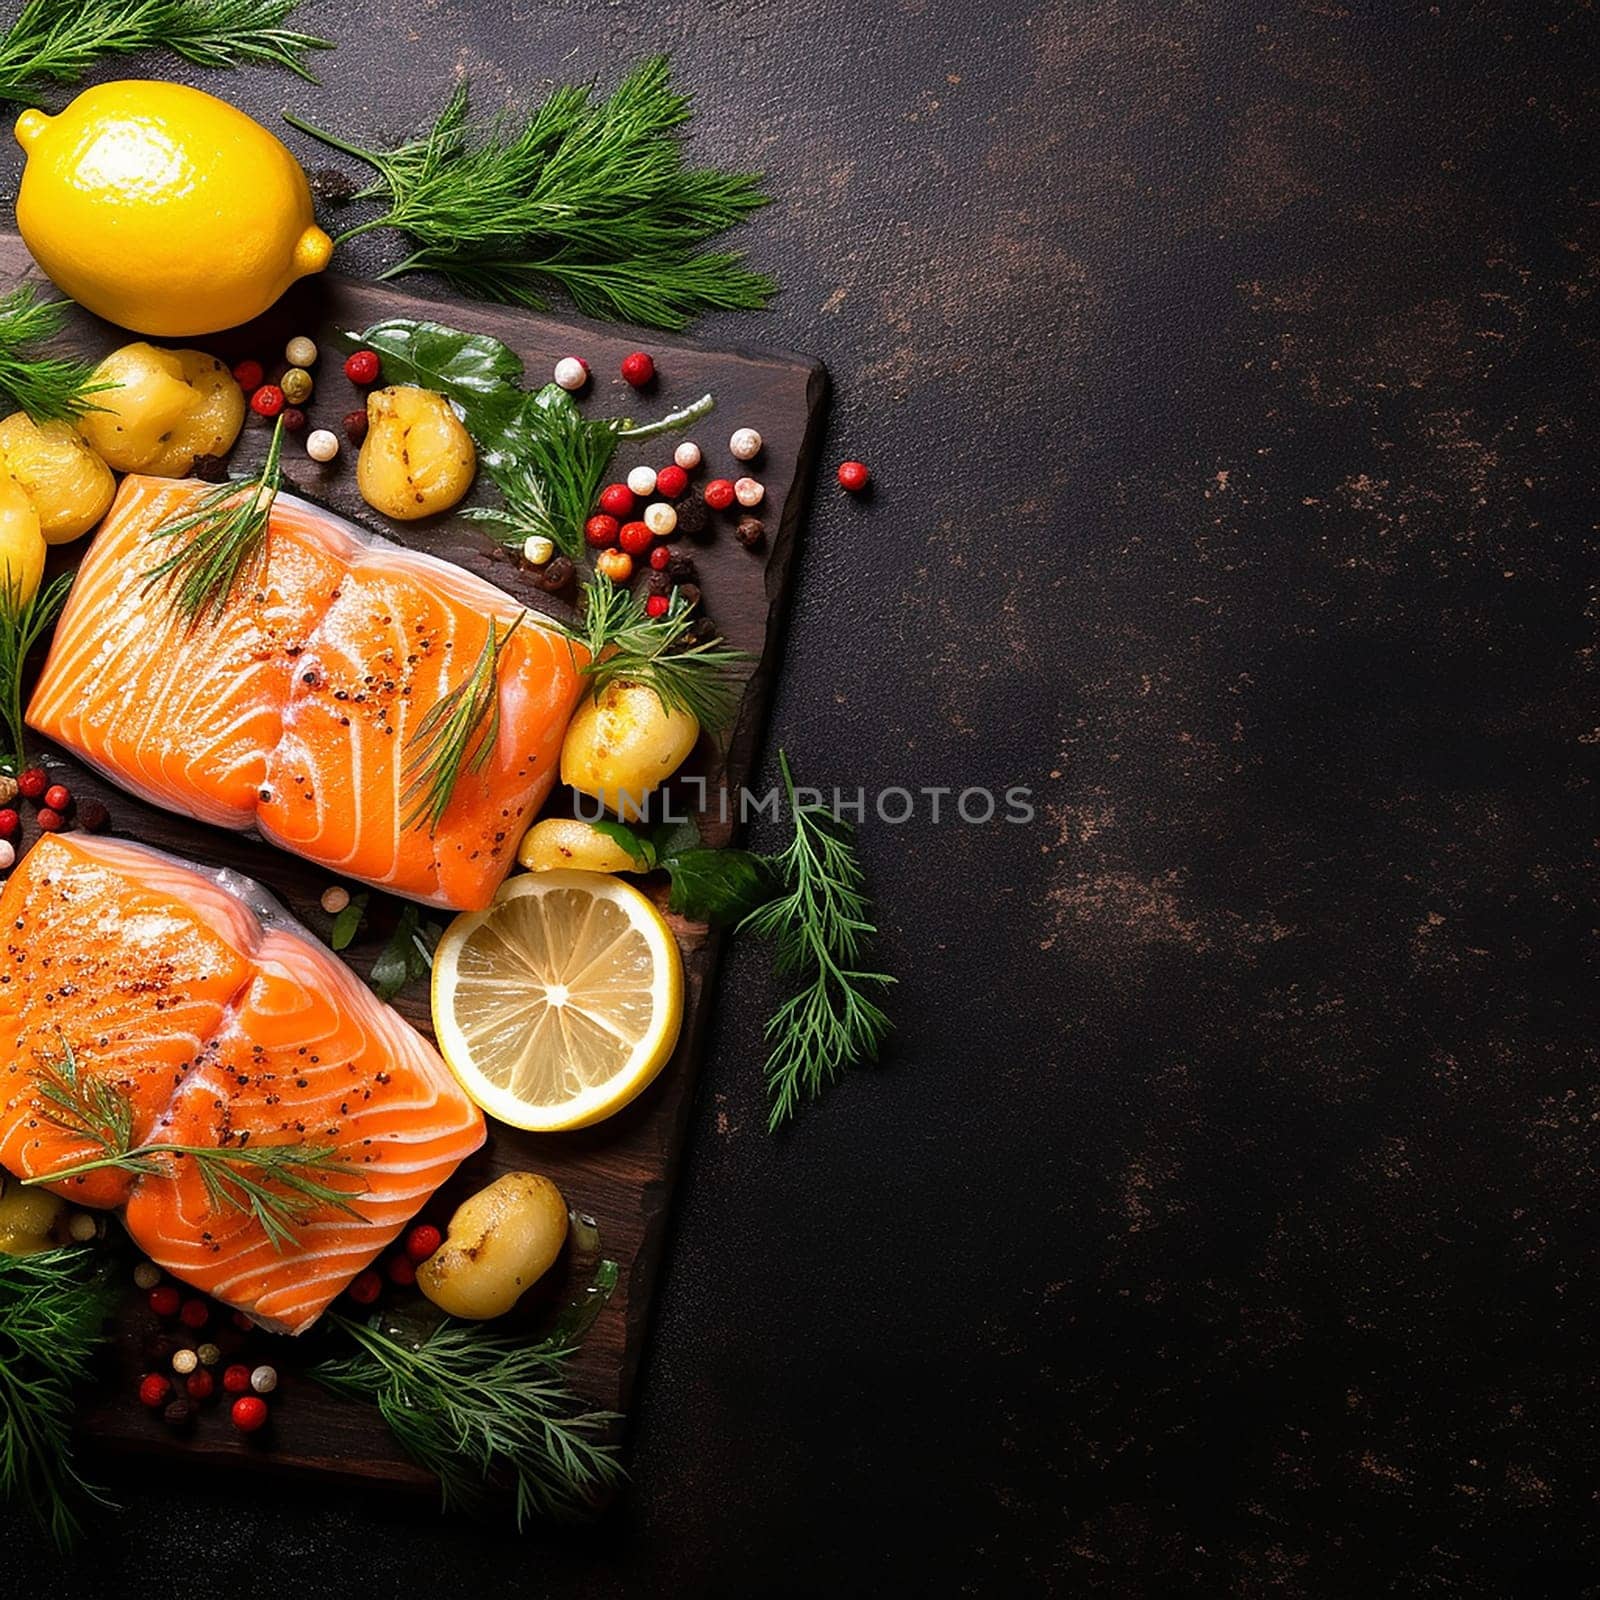 Fresh salmon fillets with herbs, spices, and citrus on a dark background.